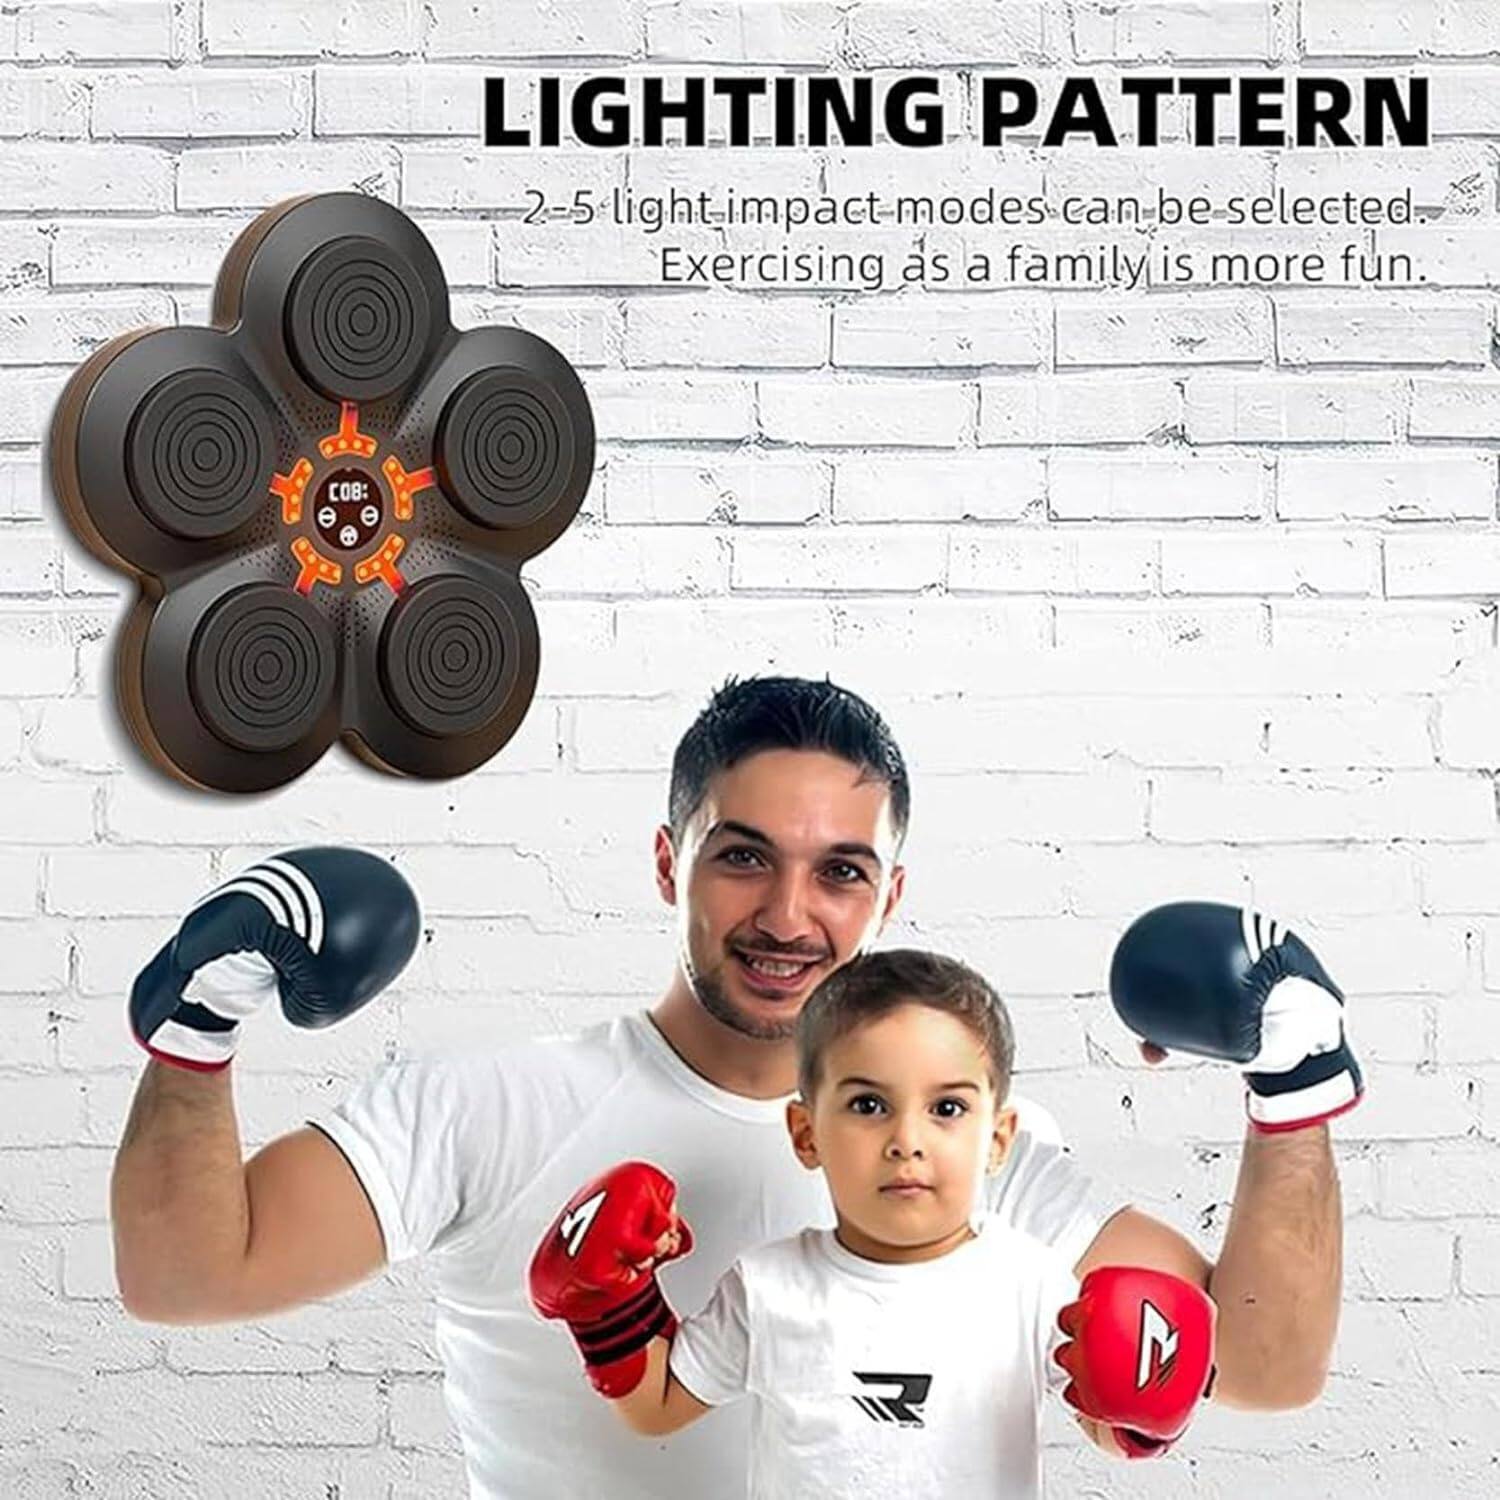 Electronic Music Boxing Machine, Wall Mounted Smart Boxing Game with Gloves, Can Connect to Bluetooth, LED Lighting Target for Adults Children Exercise/Boxing Training